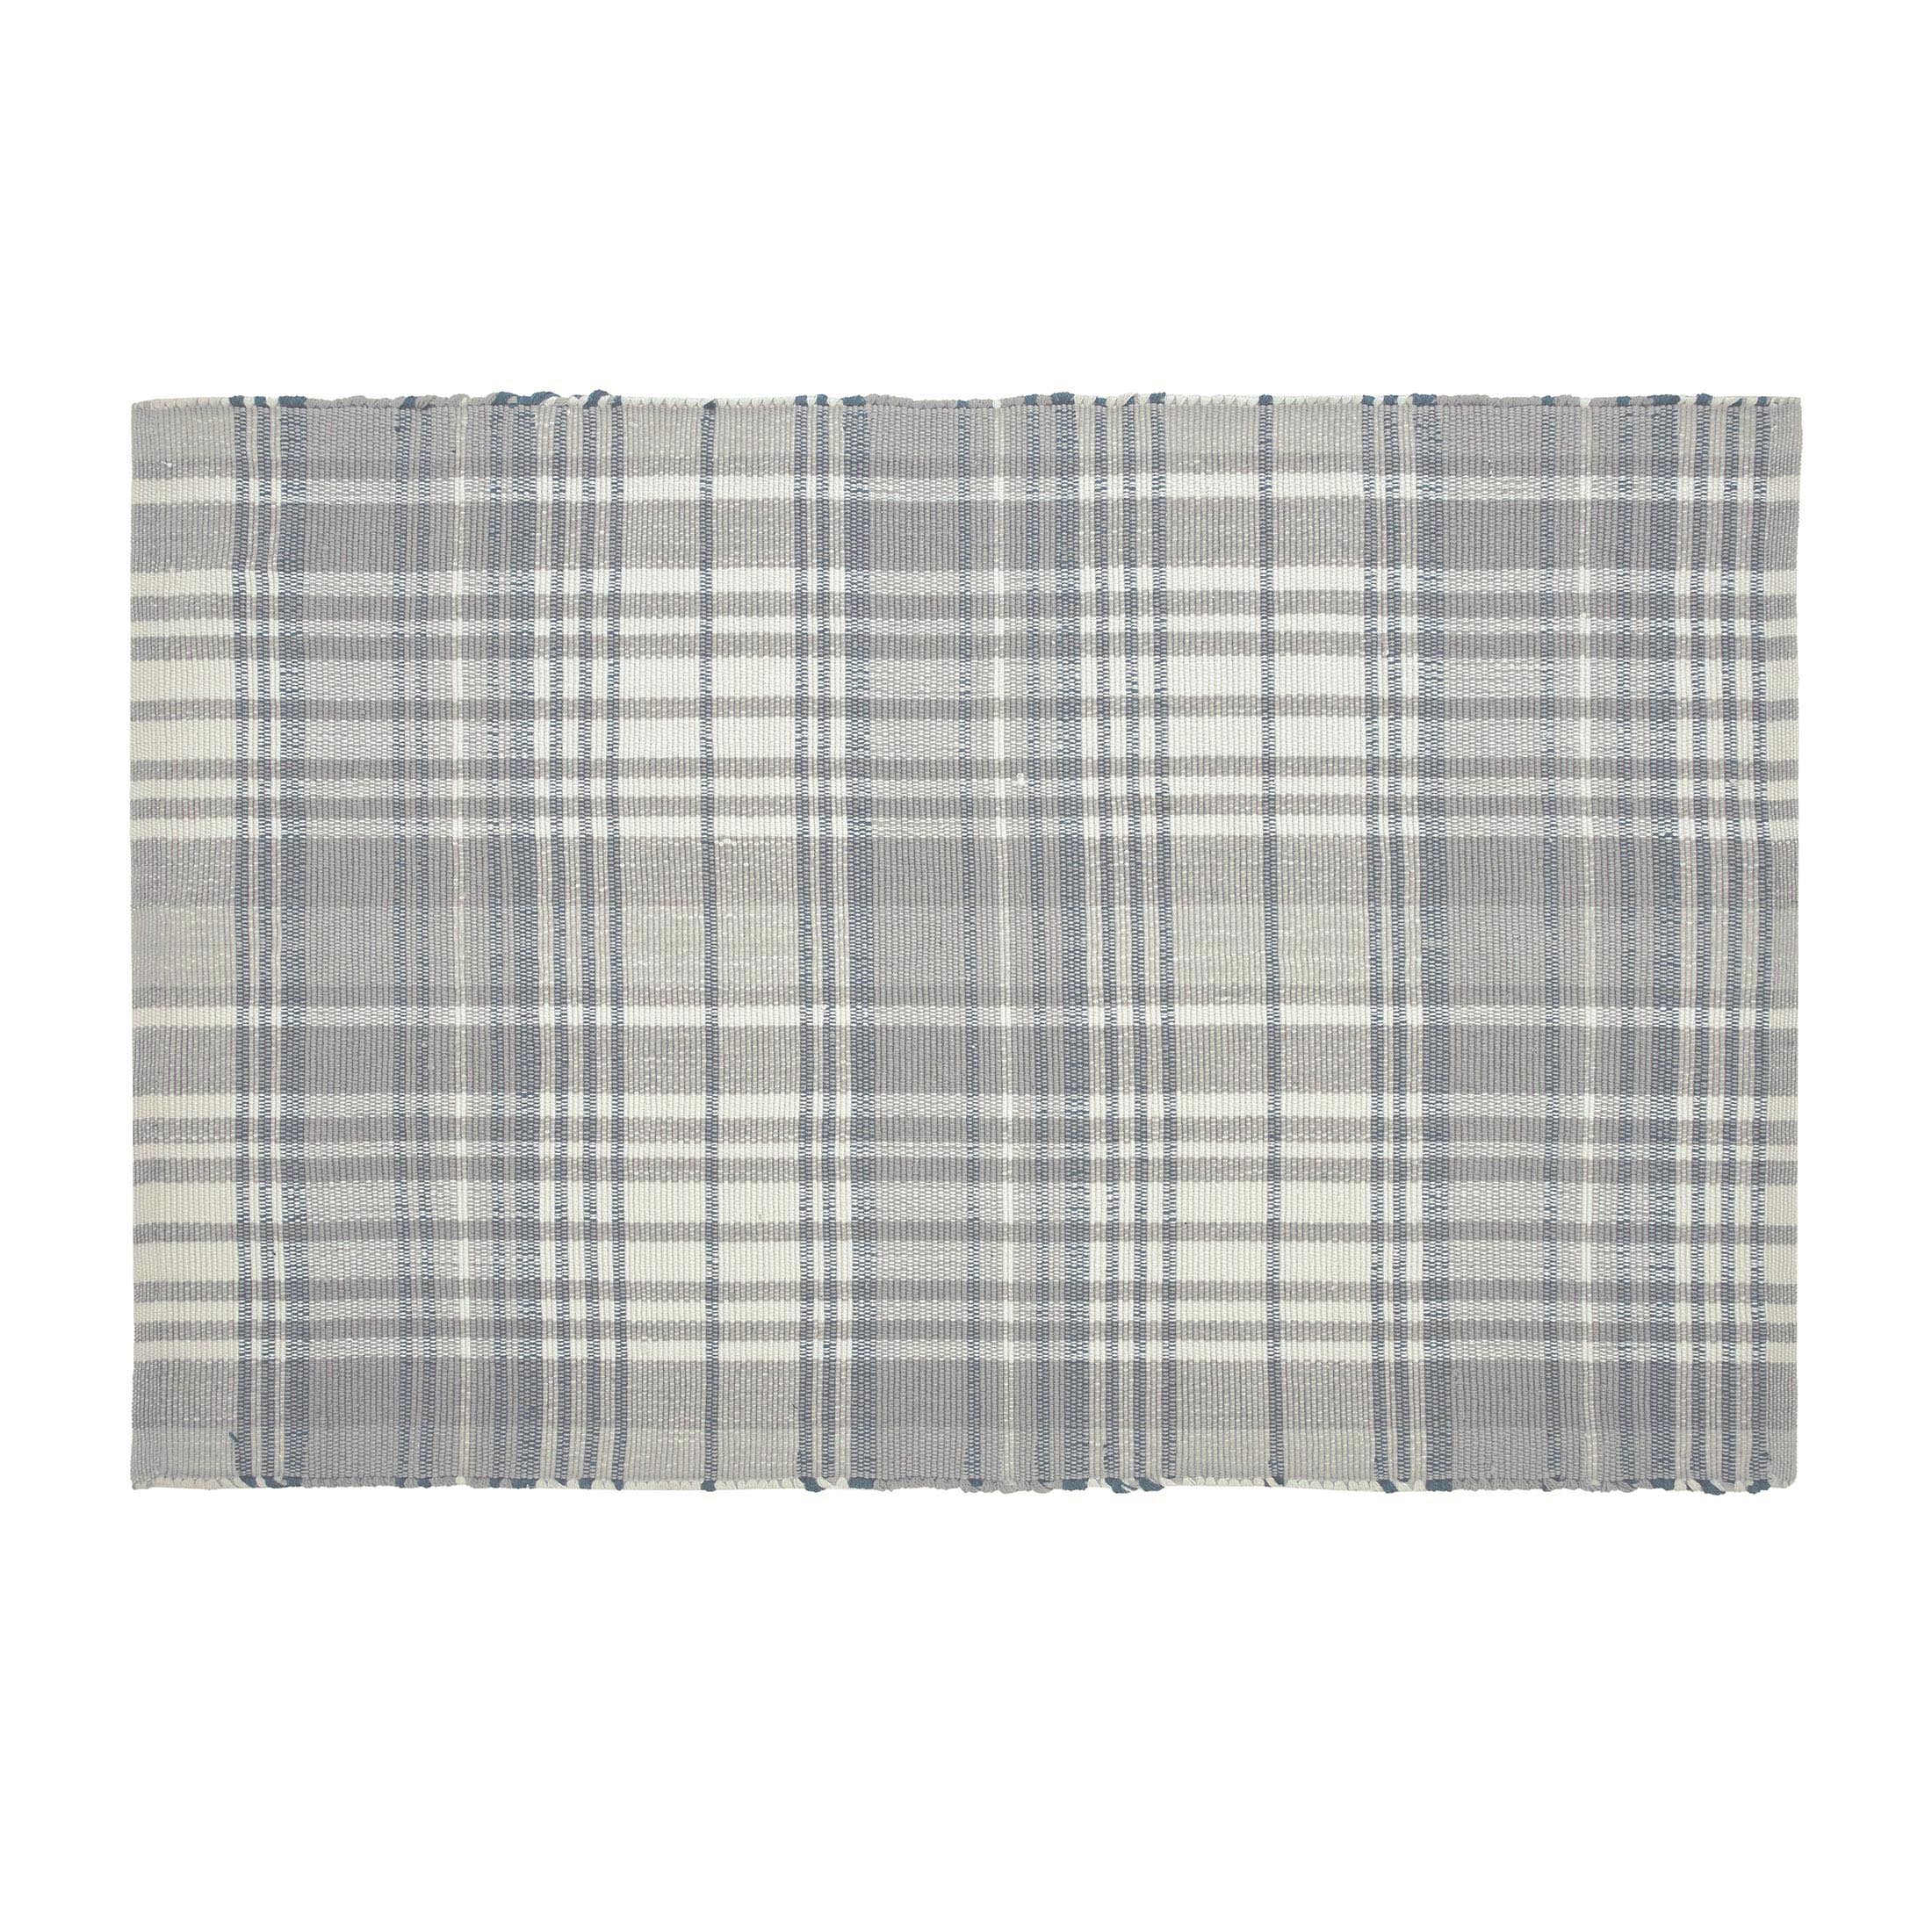 My Texas House Grey Plaid Layering Polyester Indoor/Outdoor Area Rug, 24" x 36" - image 1 of 7